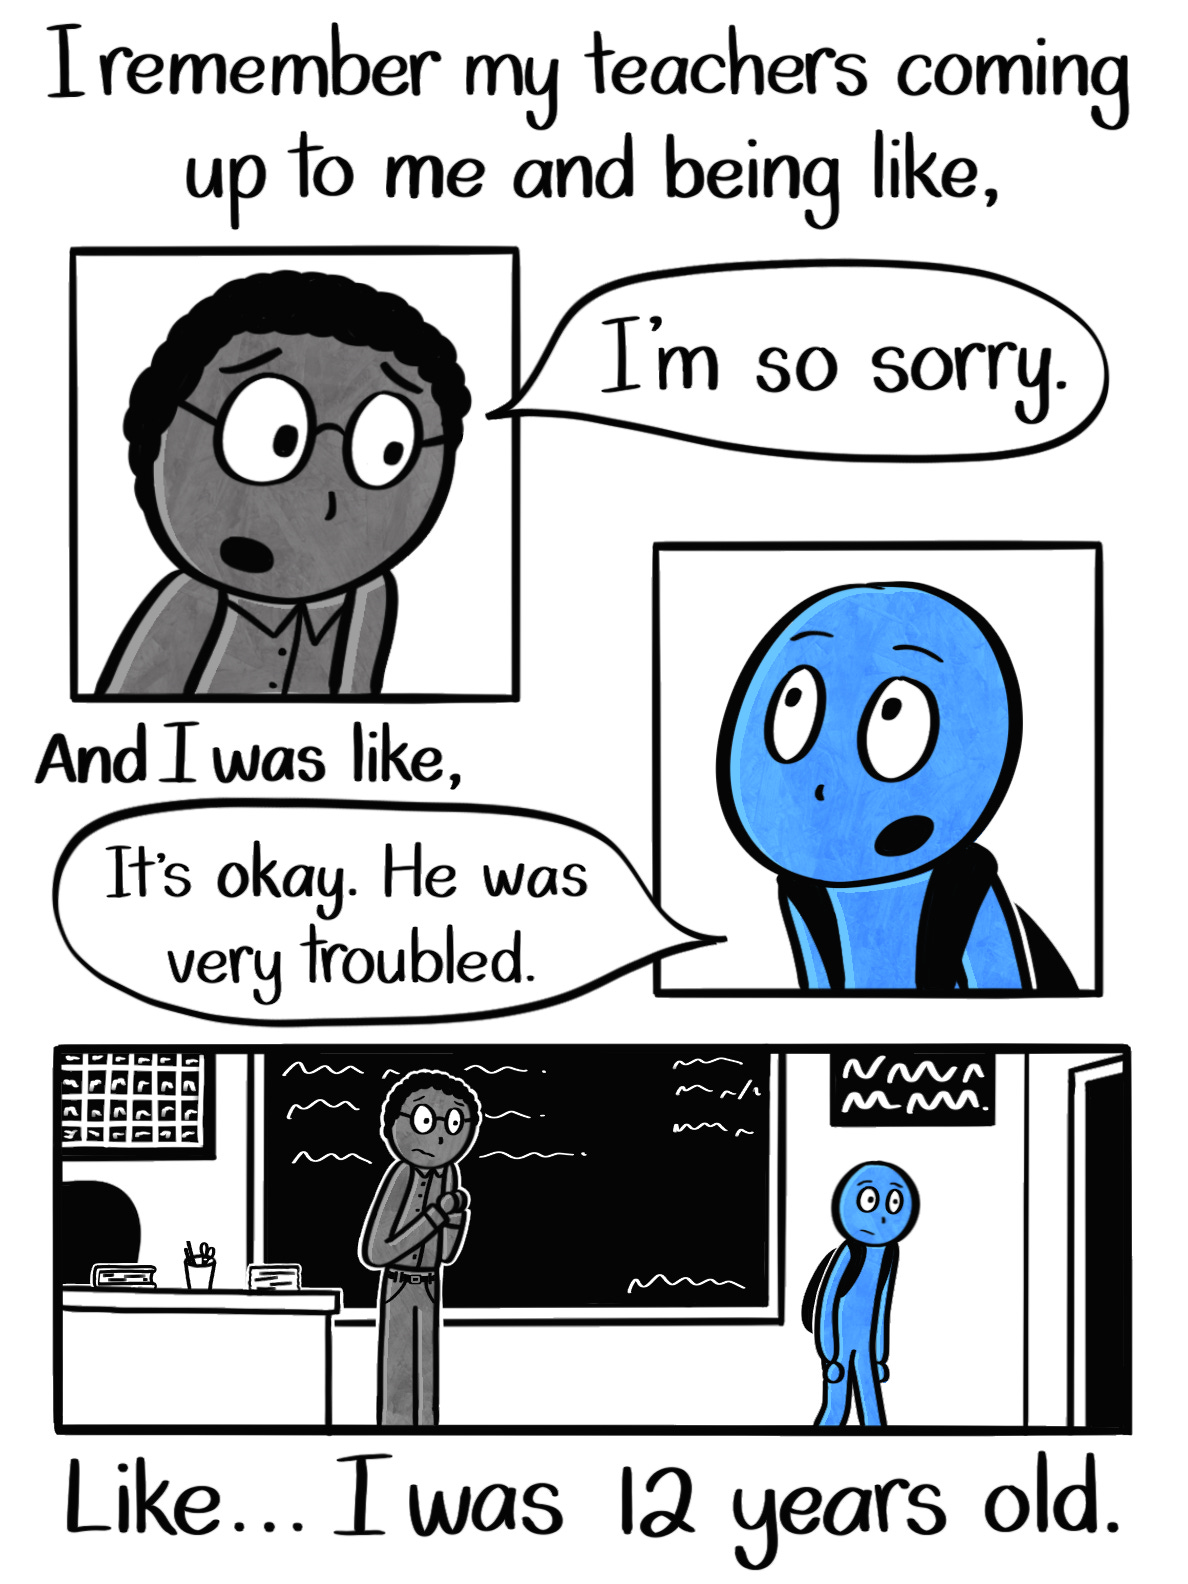 Caption: I remember teachers coming up to me and being like, "I'm so sorry." And I was like, "It's okay. He was very troubled." Like... I was 12 years old. Image: First panel shows the teacher's face, a dark-skinned man with curly black hair and glasses, speaking to the Blue Person. The next panel shows the Blue Person's face, looking up at the teacher. The final panel is a wider shot of the Blue Person, much shorter than the teacher, walking away from the conversation while the teacher looks on with a melancholy look on his face.